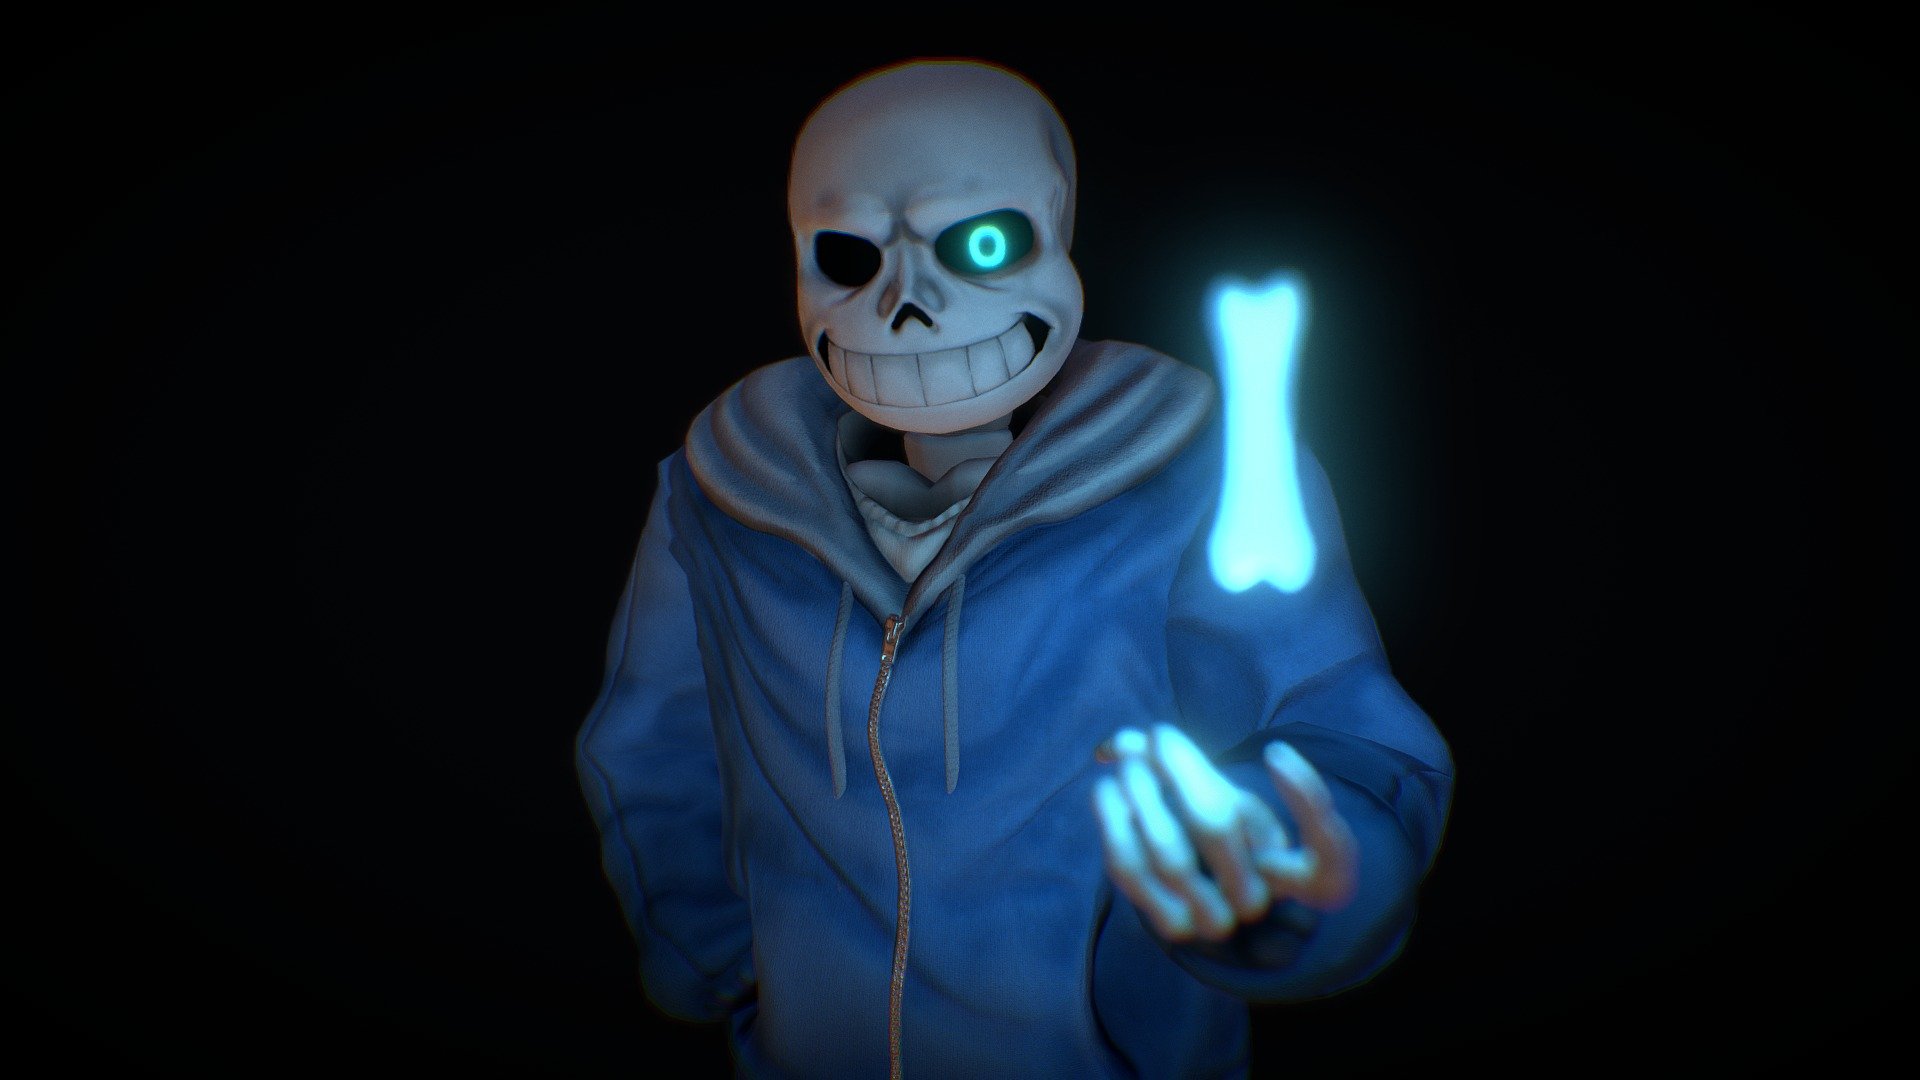 modeled sans for fun and practice.

-Undertale and sans belongs to Toby Fox - Sans from Undertale - 3D model by Georgia.Perry 3d model